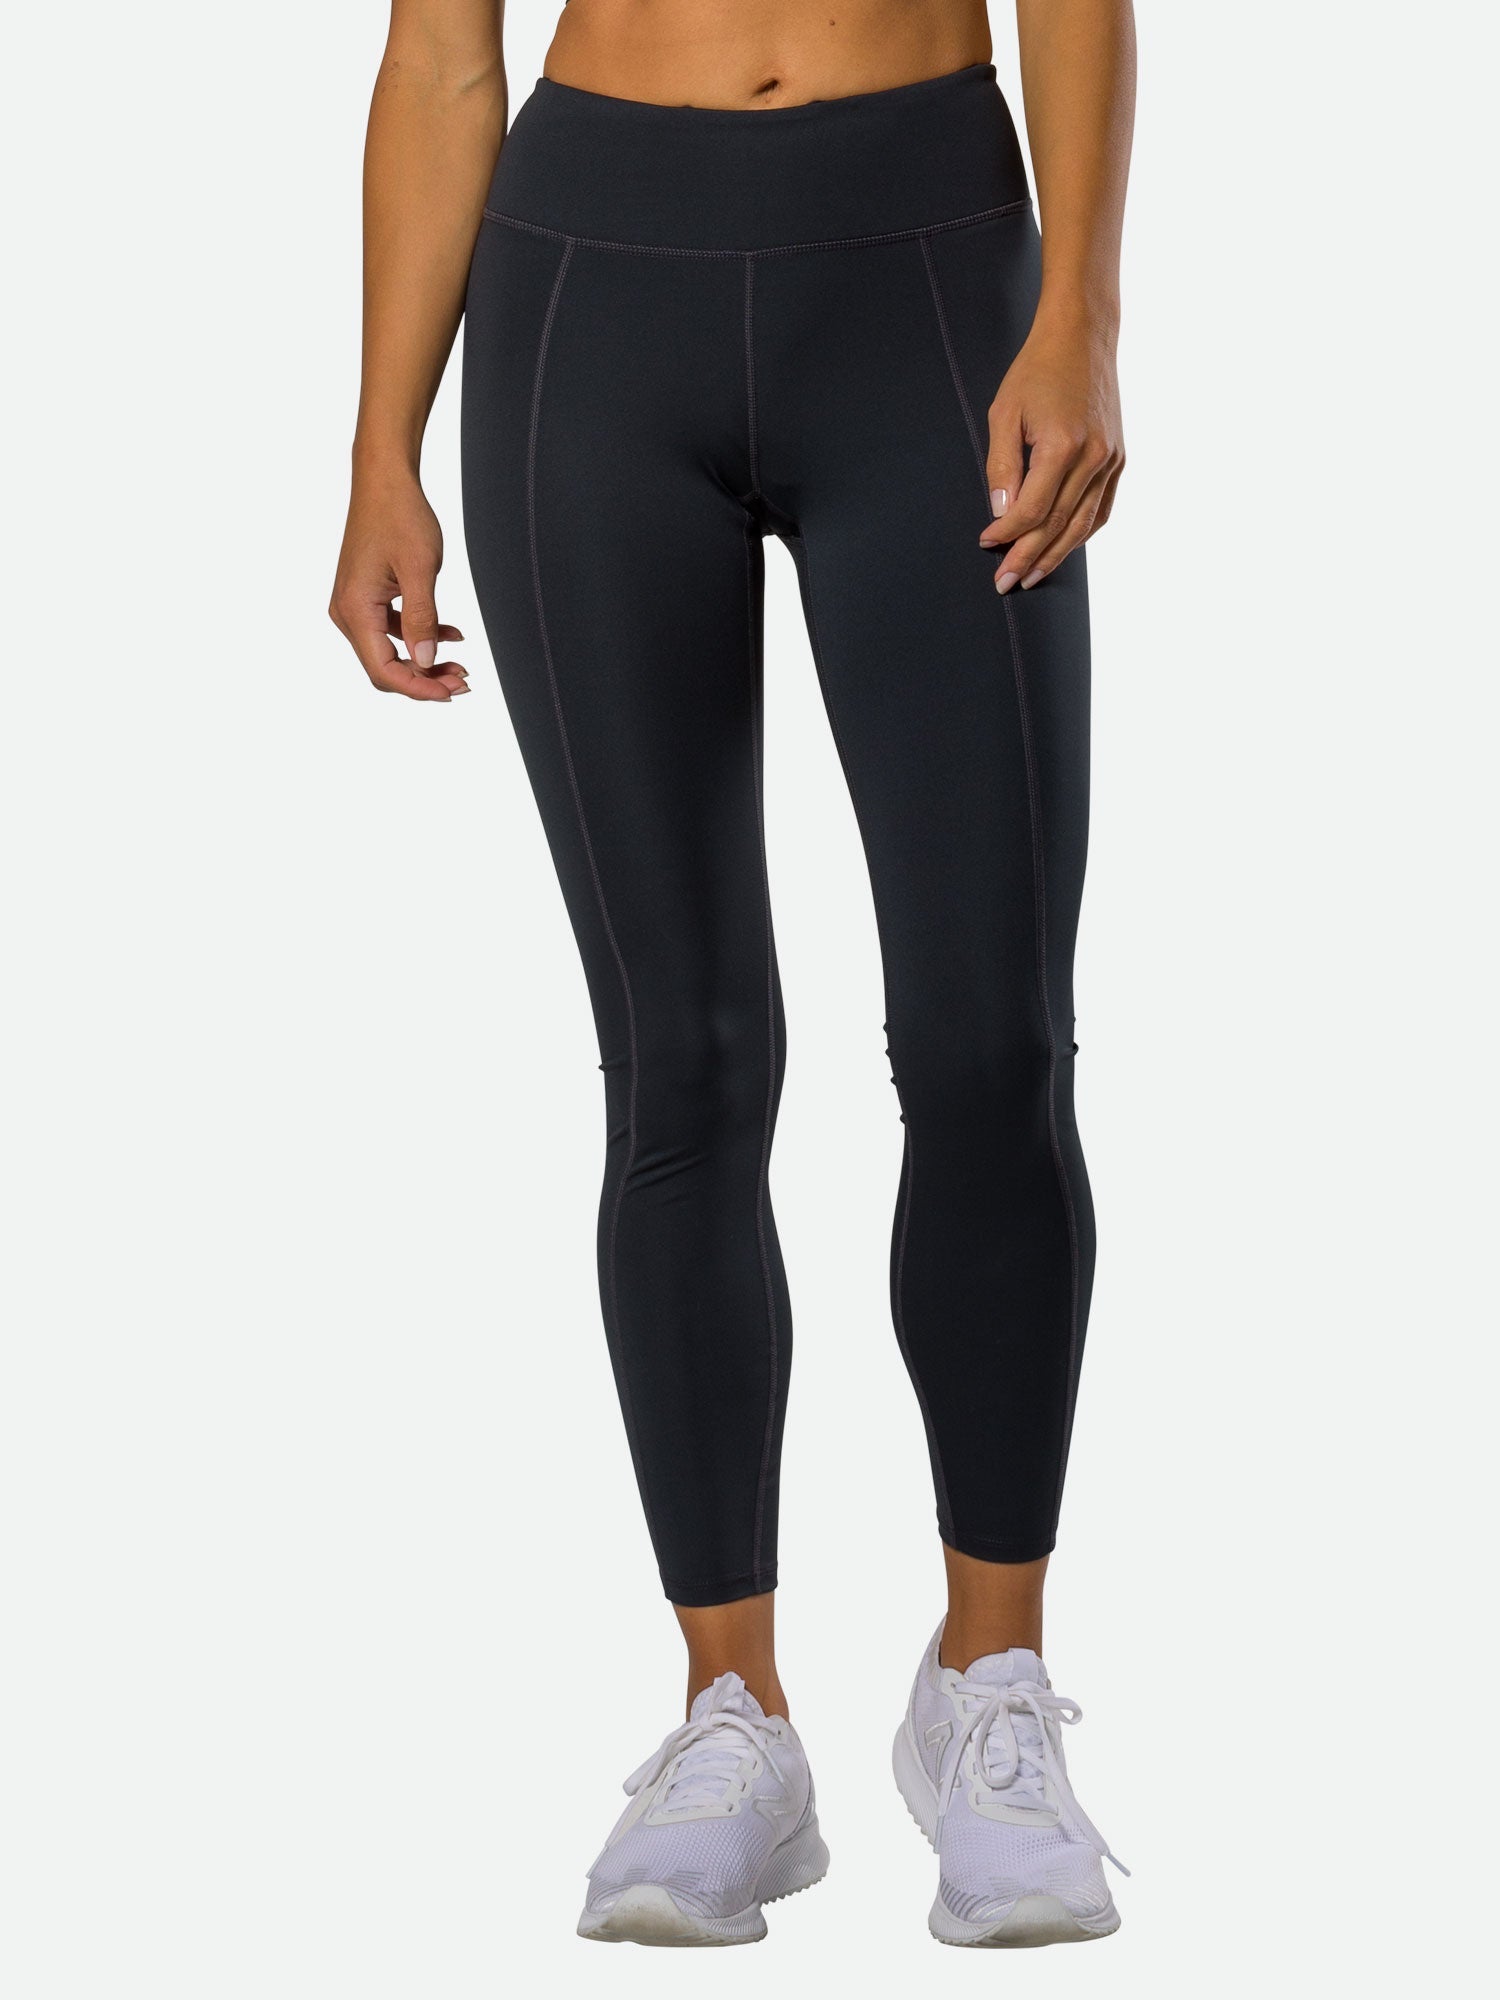 Champion leggings with large side logo in black